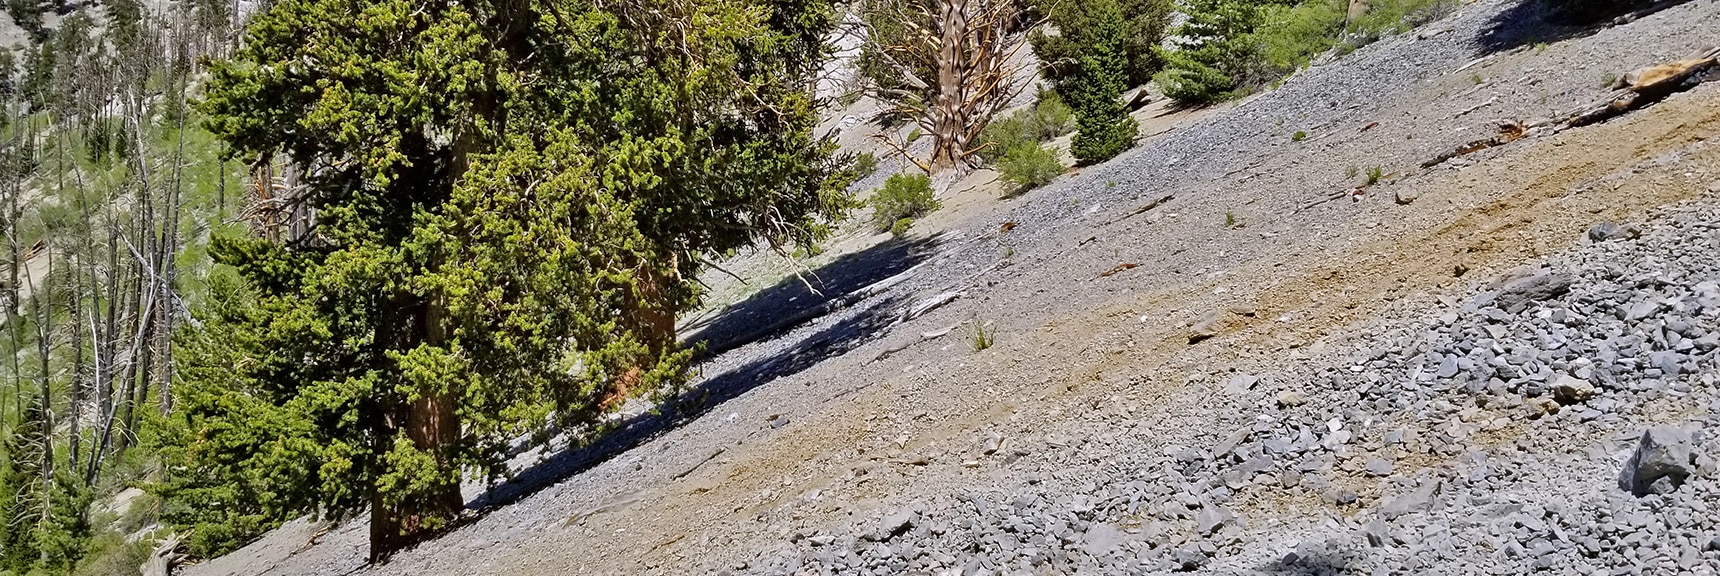 Angle of Ascent on the "Horrifying Half-Mile" Avalanche Slope. | Mummy Mountain NW Cliffs | Mt Charleston Wilderness | Spring Mountains, Nevada